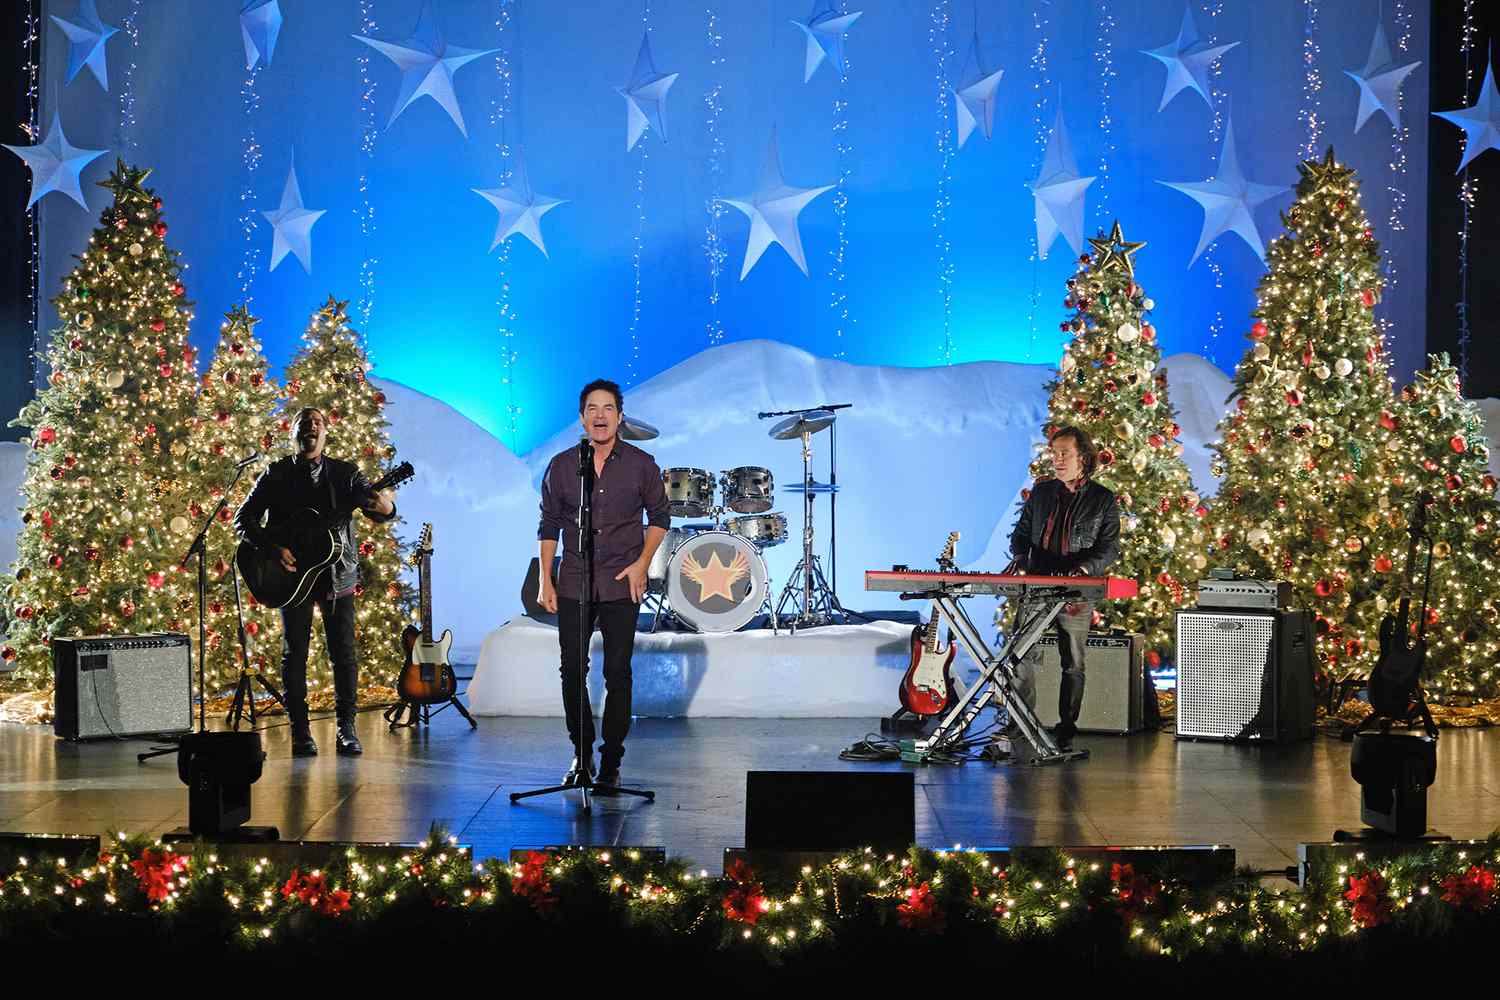 a three-man band performing on a stage decorated with Christmas trees